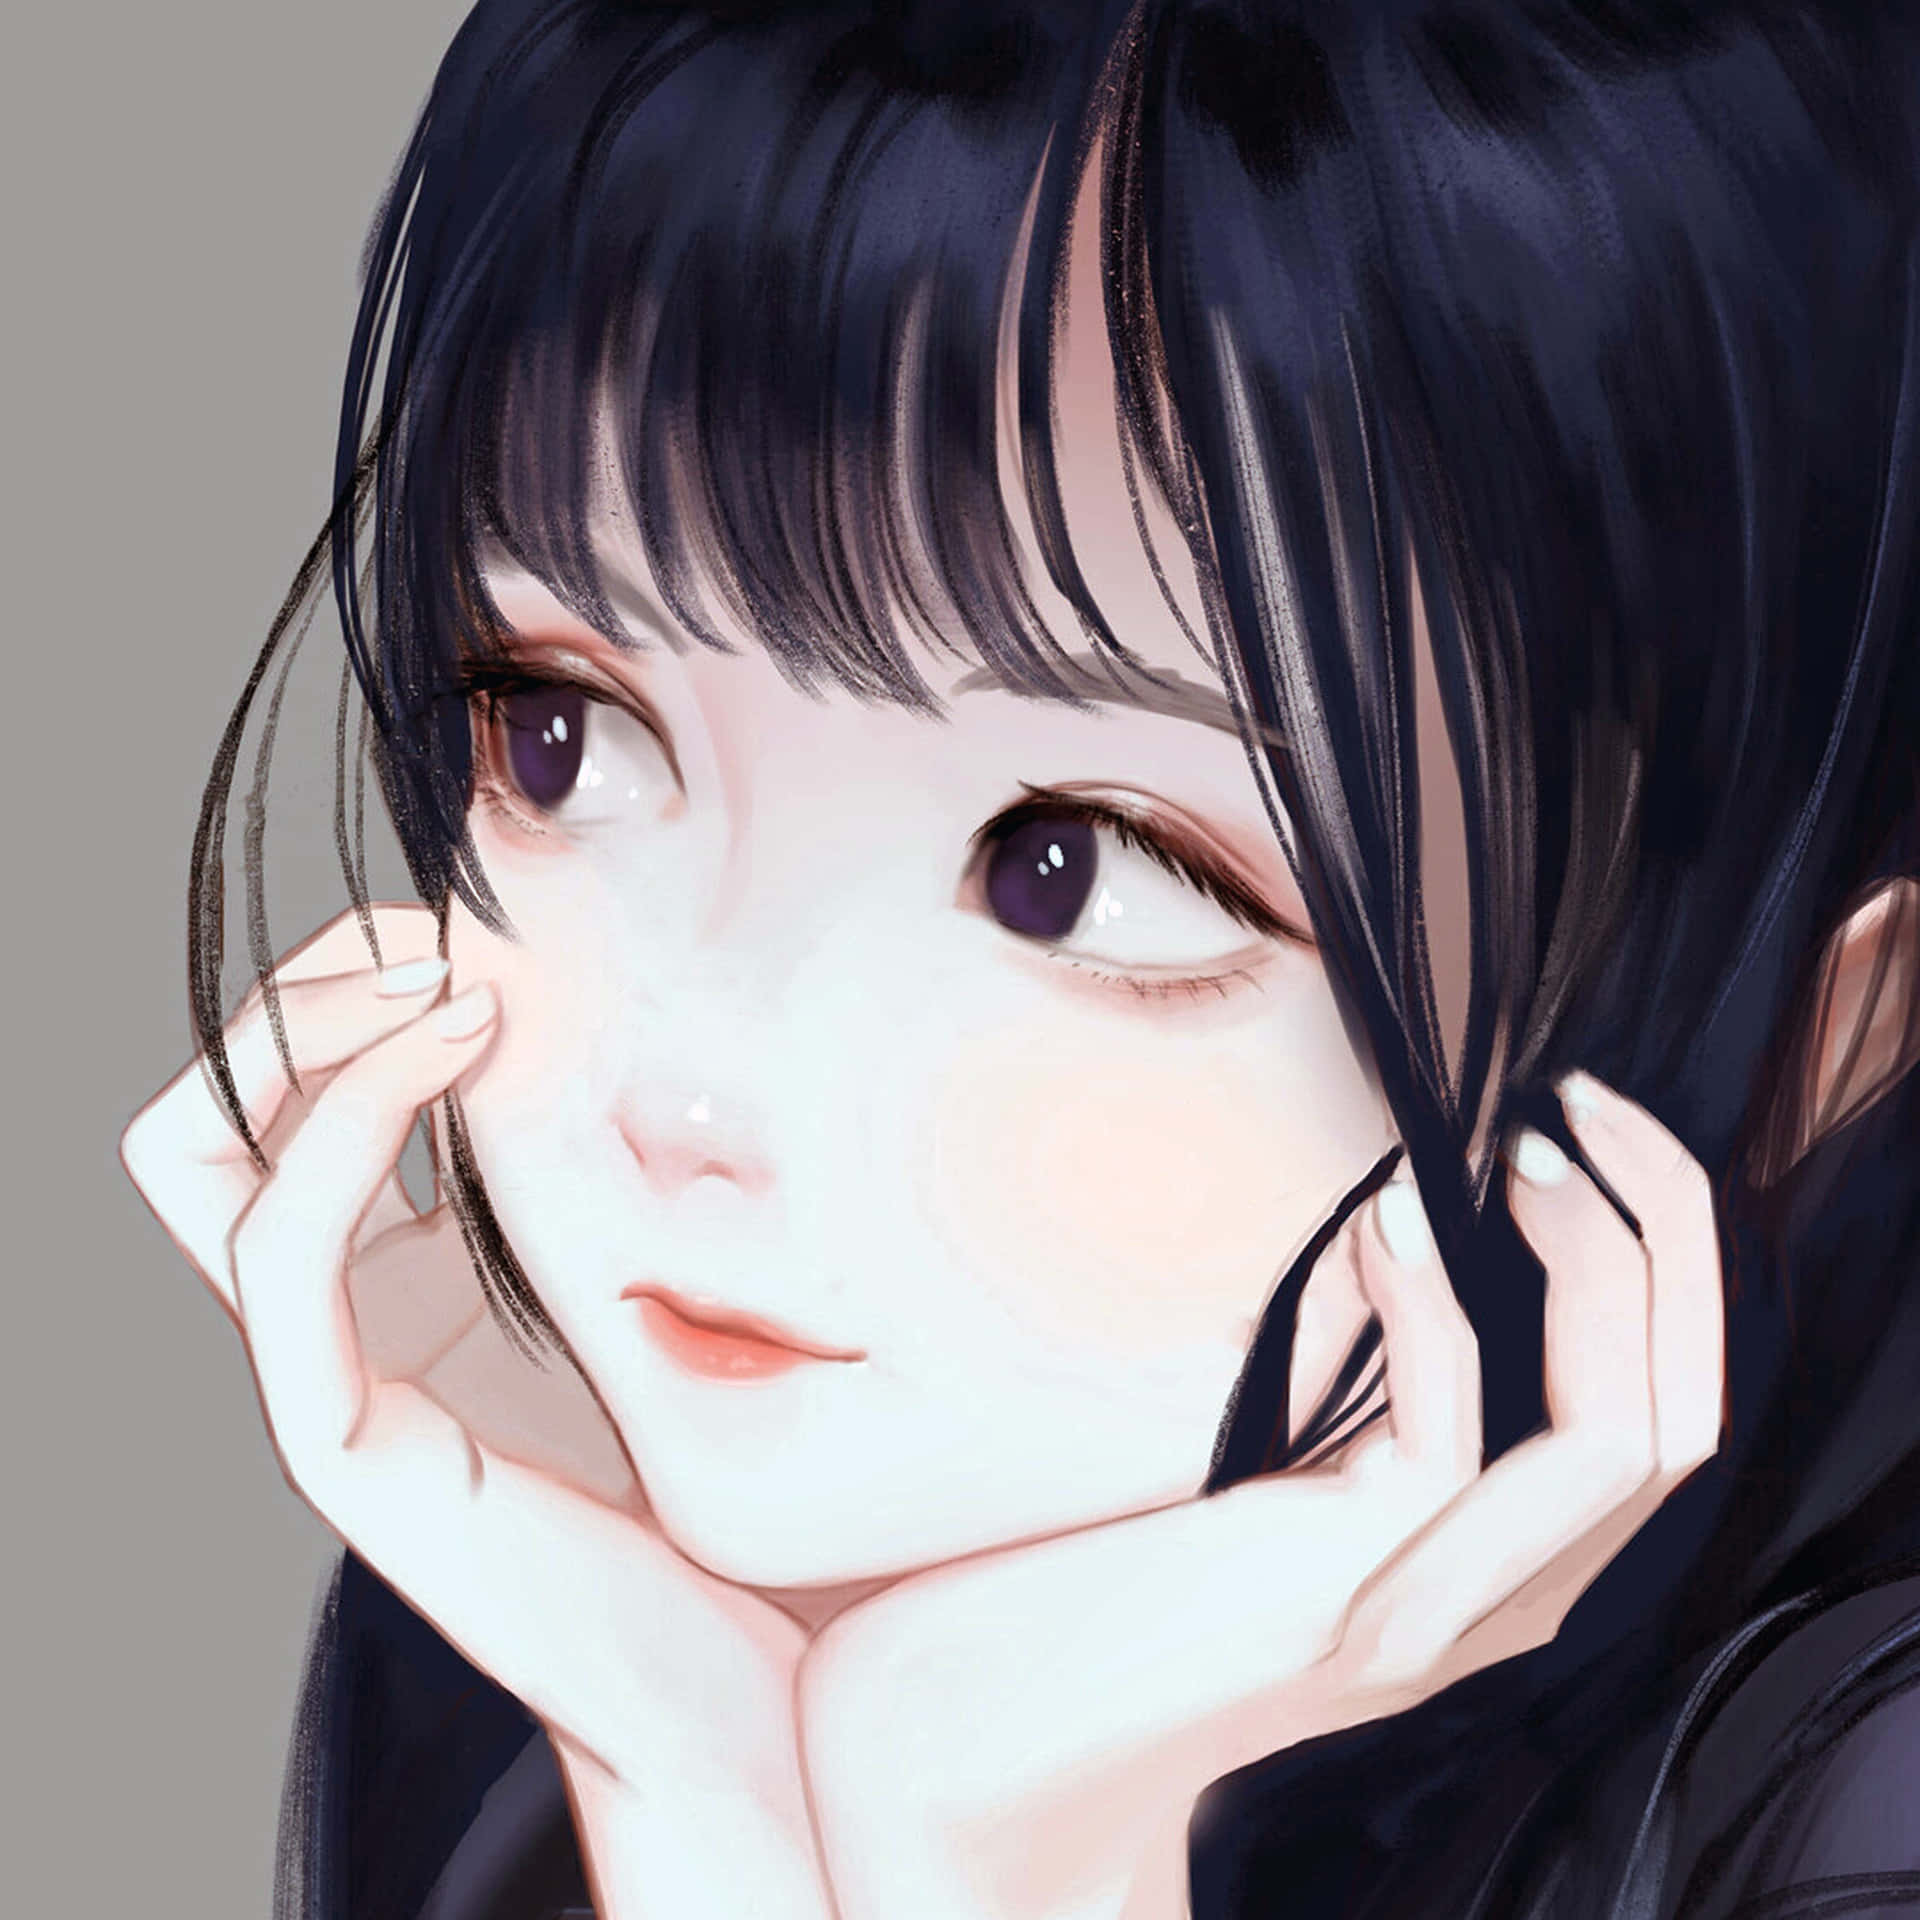 Graceful Korean Anime Girl With A Vividly Captivating Expression. Background